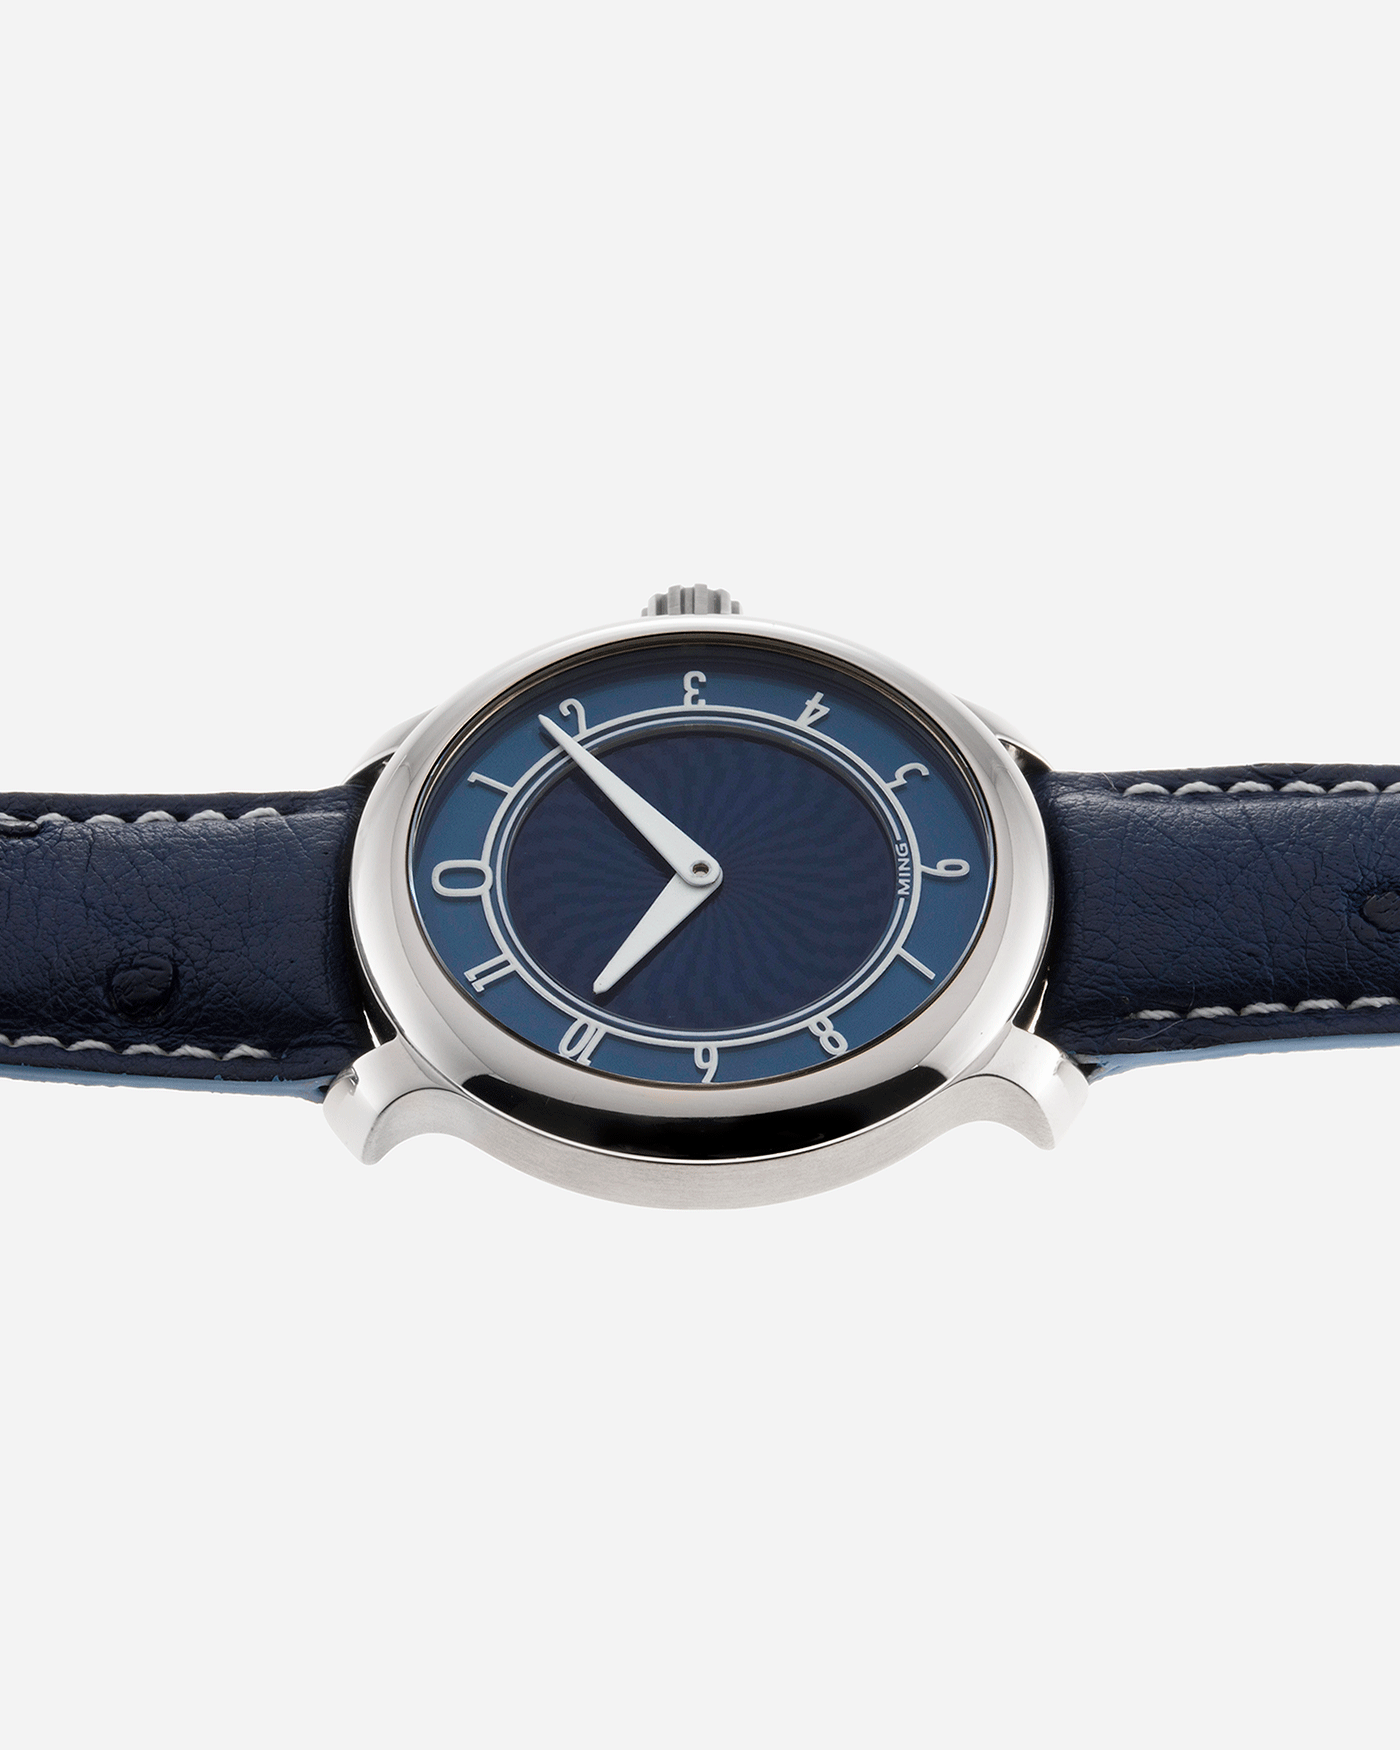 Brand: Ming Year: 2017 Model: 17.01 Material: Grade 5 Titanium Movement: Hand-winding mechanical movement Sellita SW210-1 Case Diameter: 38mm Strap: Jean Rousseau Blue Strap for MING